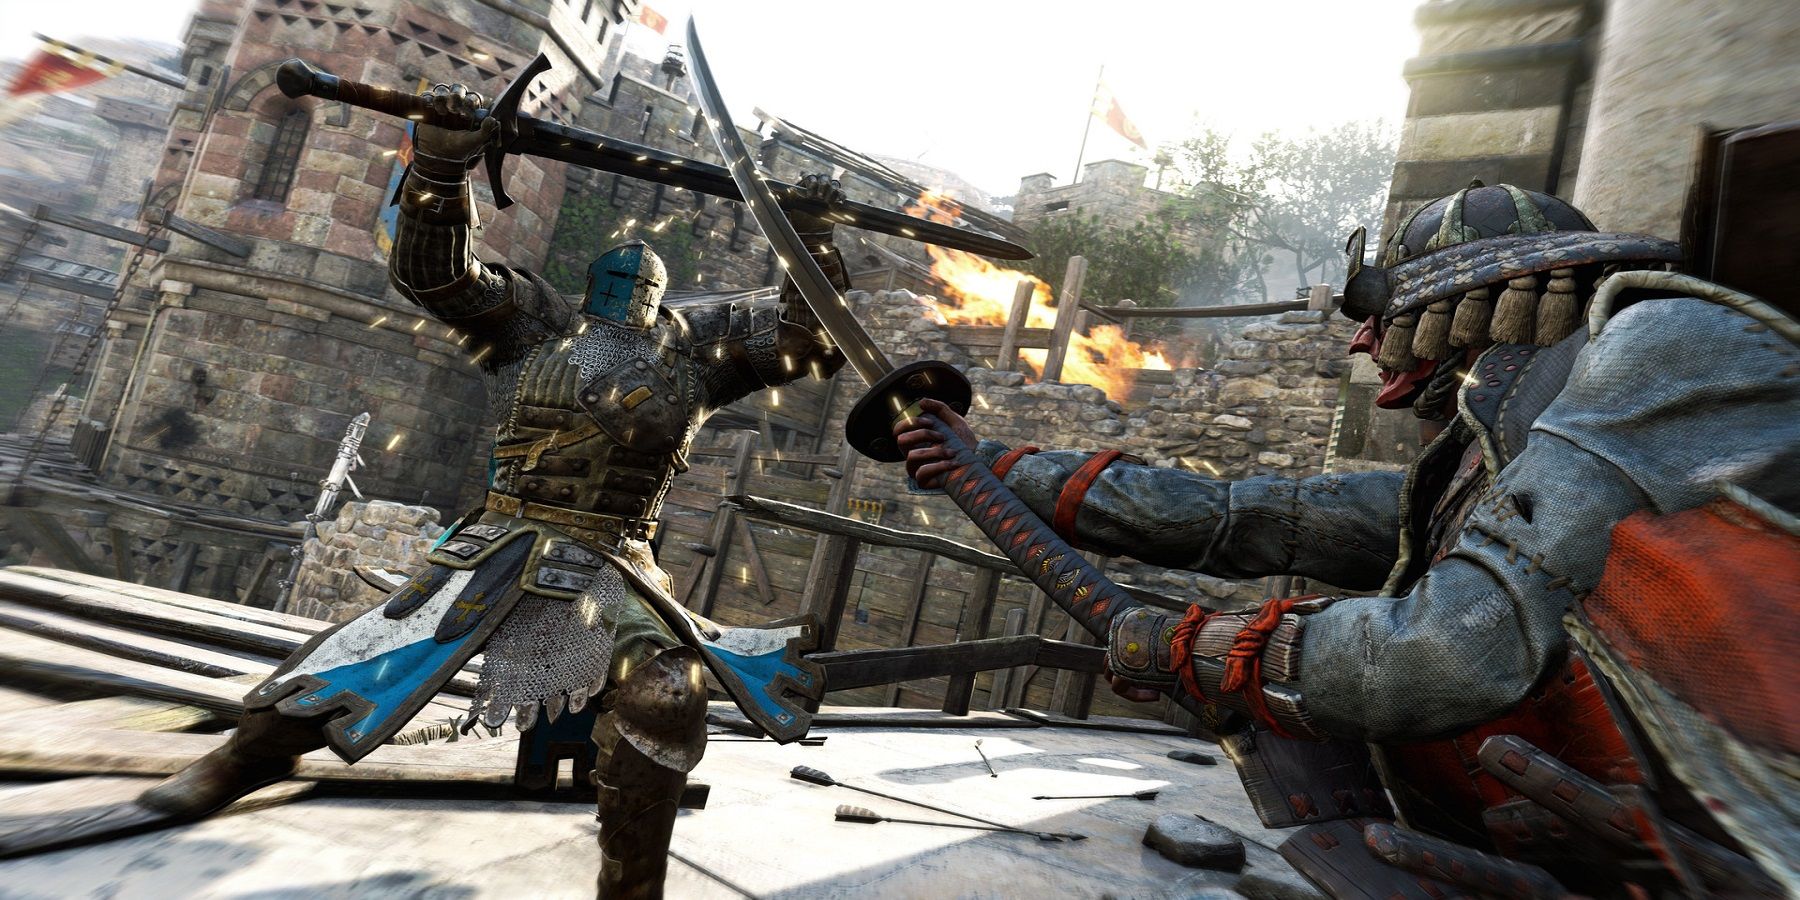 The newest leak says Dead By Daylight's Chapter 26 will be a crossover with For Honor.